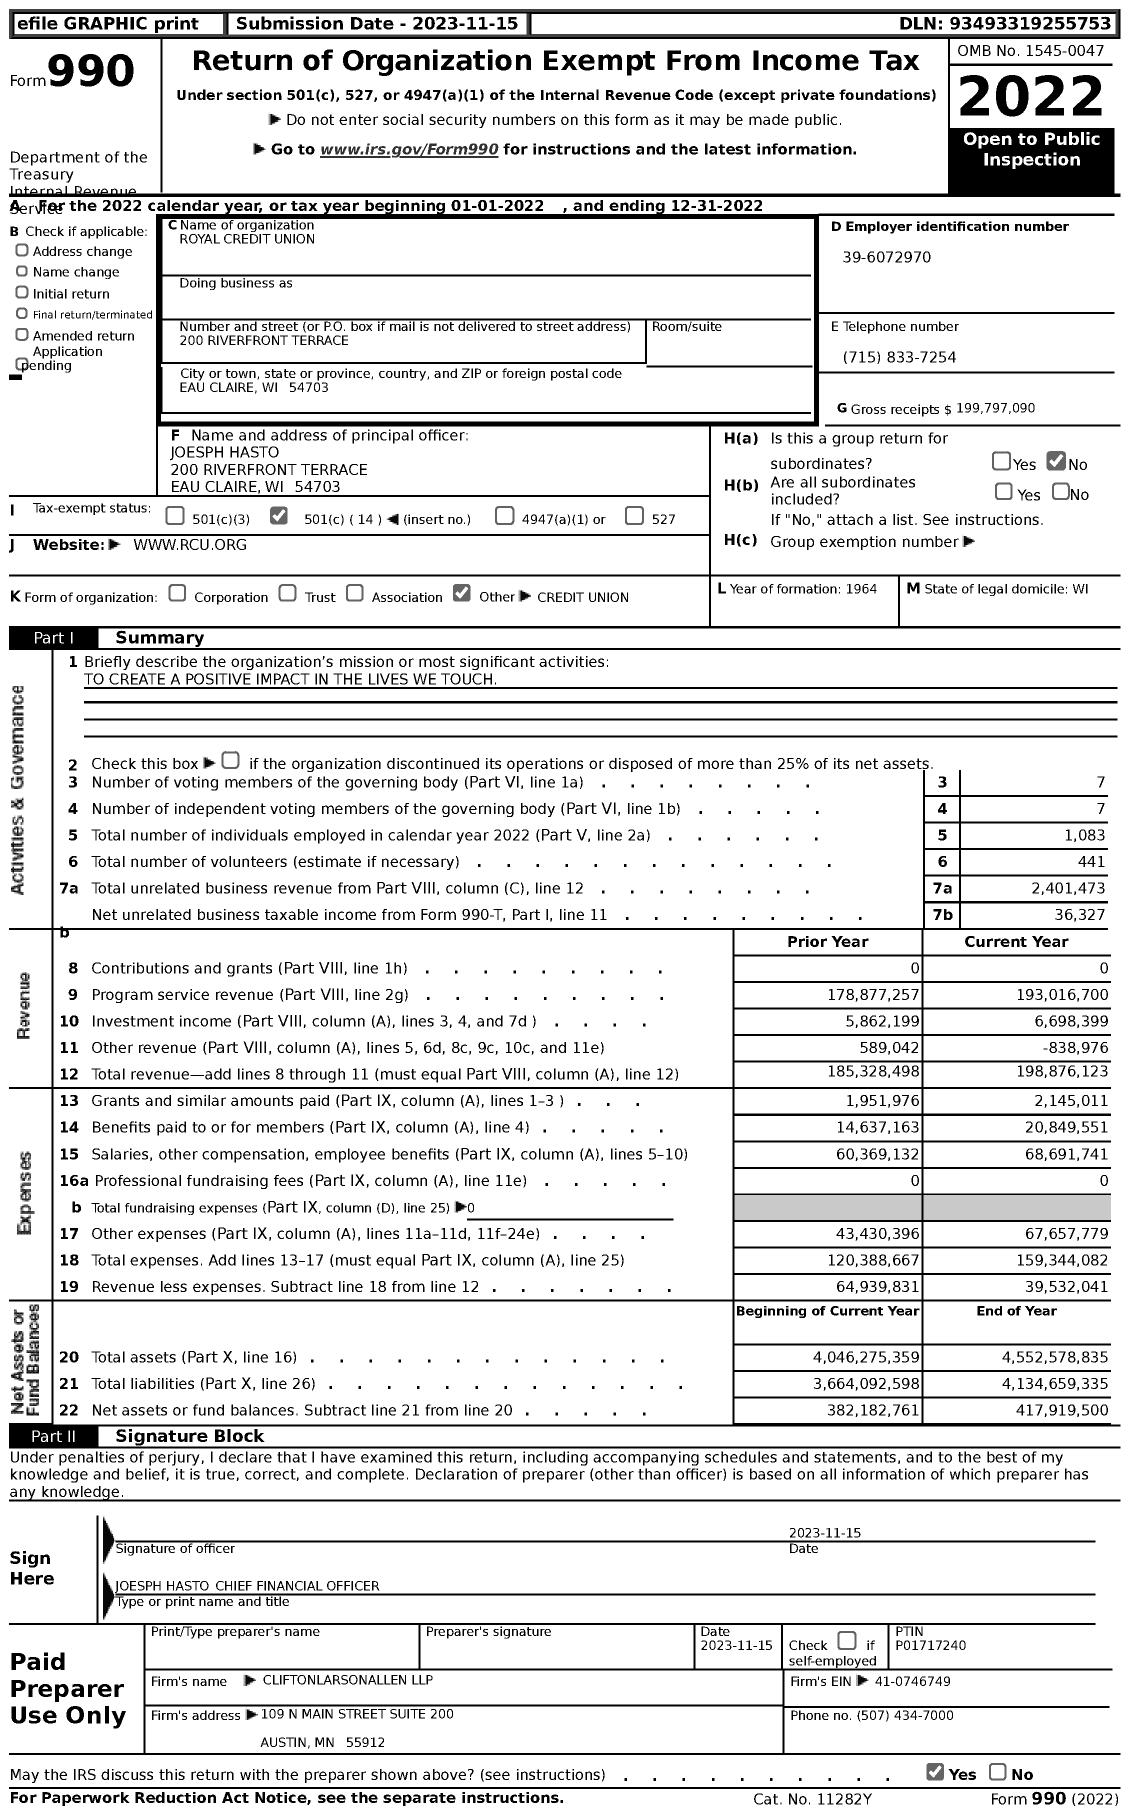 Image of first page of 2022 Form 990 for Royal Credit Union (RCU)